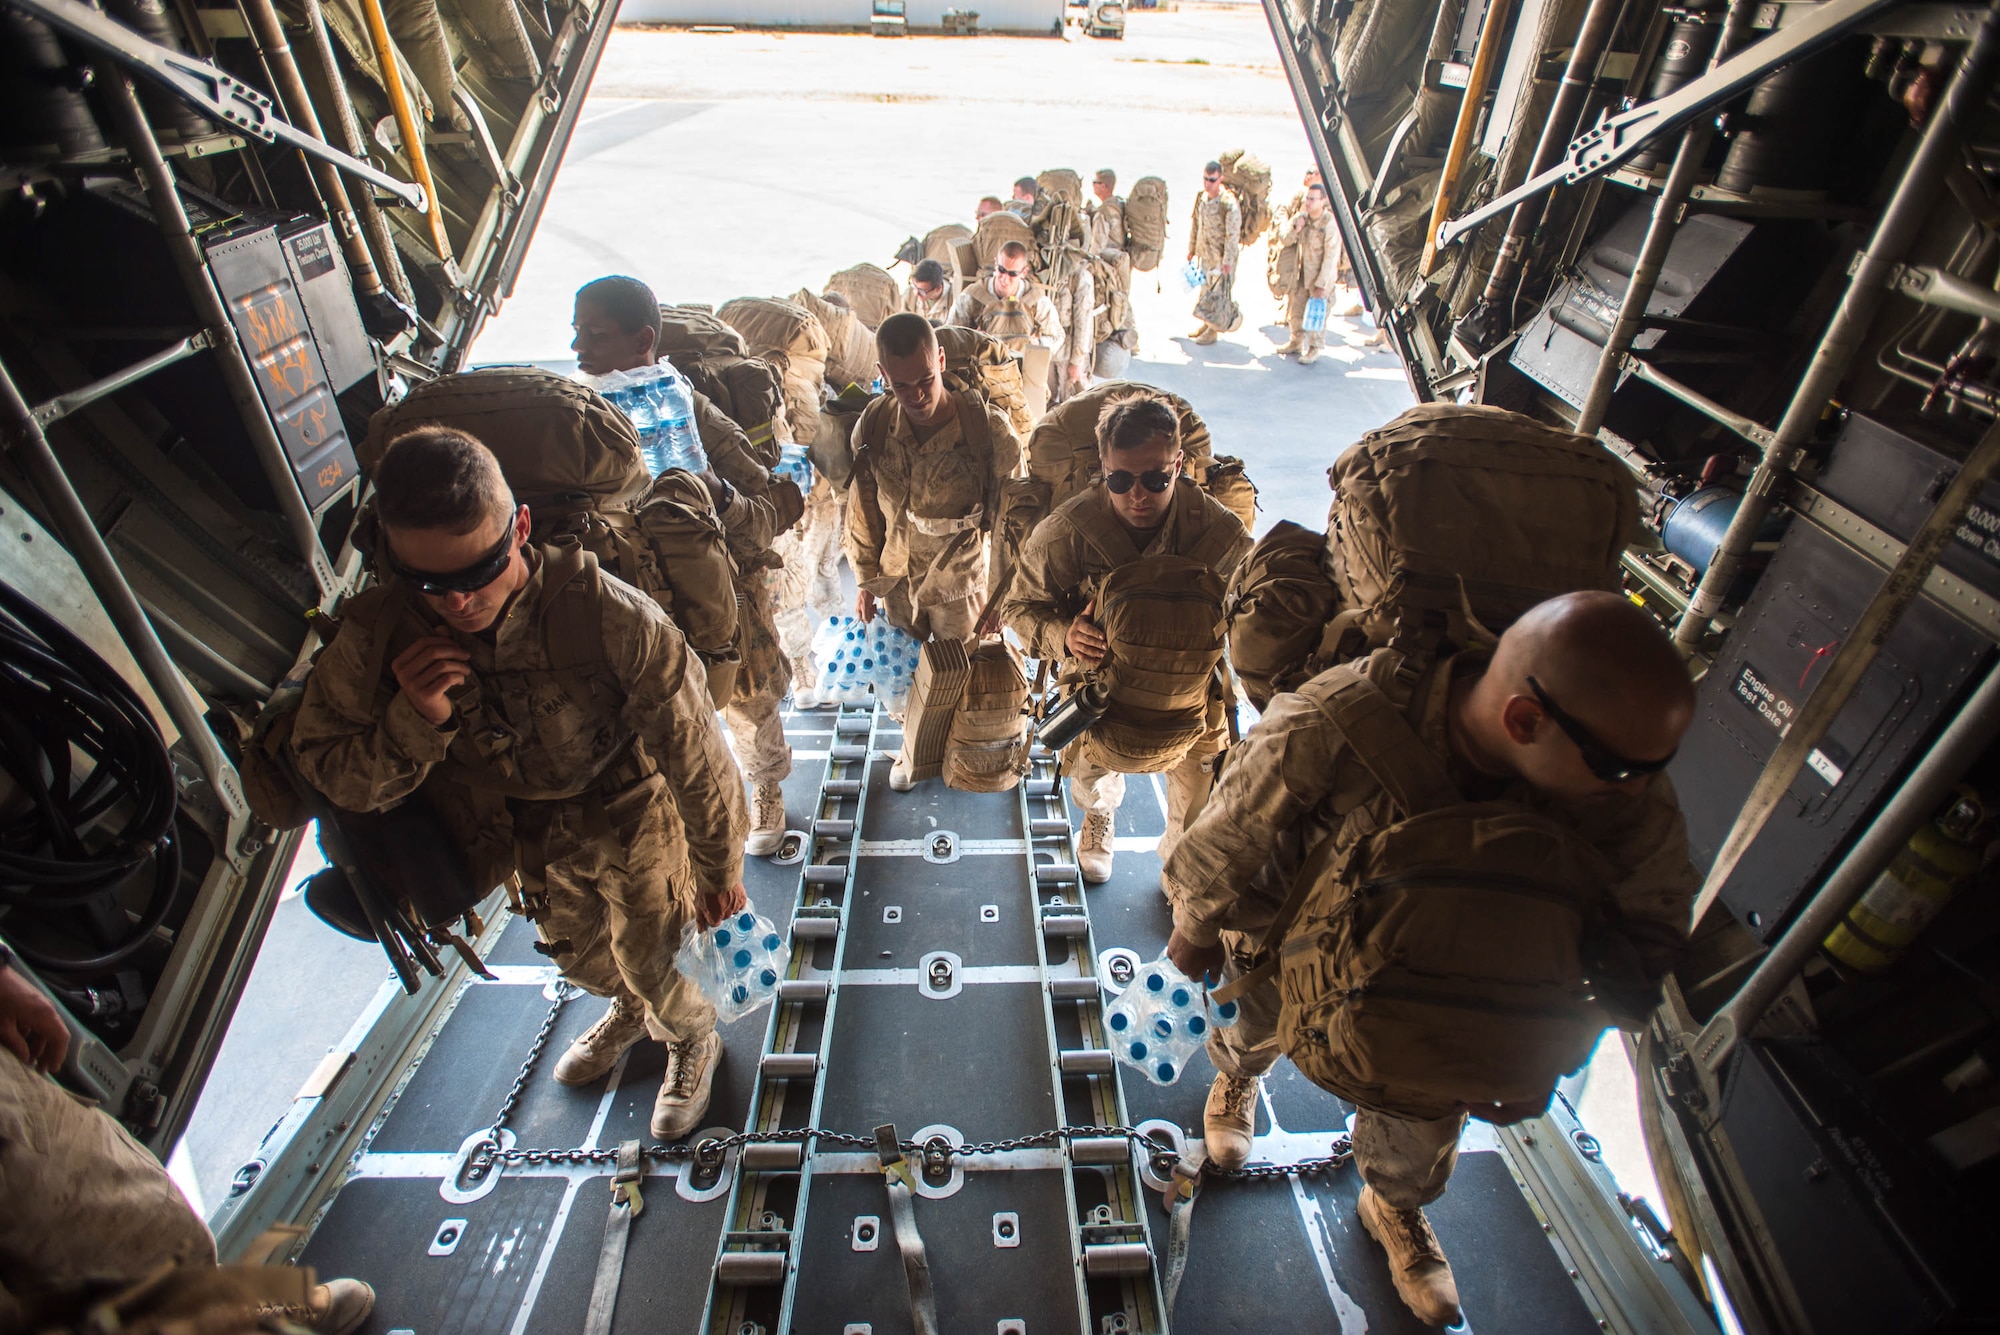 U.S. Marines board a Kentucky Air National Guard C-130 Hercules at Guelmim Airport in Morocco on April 27, 2017, during Exercise African Lion. Multiple units from the U.S. Marine Corps, U.S. Army, U.S. Navy, U.S. Air Force and the Kentucky and Utah Air National Guards conducted multilateral and stability operations training with units from the Royal Moroccan Armed Forces in the Kingdom of Morocco during the exercise, which ran from April 19 to 28. The annual combined multilateral exercise is designed to improve interoperability and mutual understanding of each nation’s tactics, techniques and procedures while demonstrating the strong bond between the nations’ militaries. (U.S. Air Force photo by Master Sgt. Phil Speck)